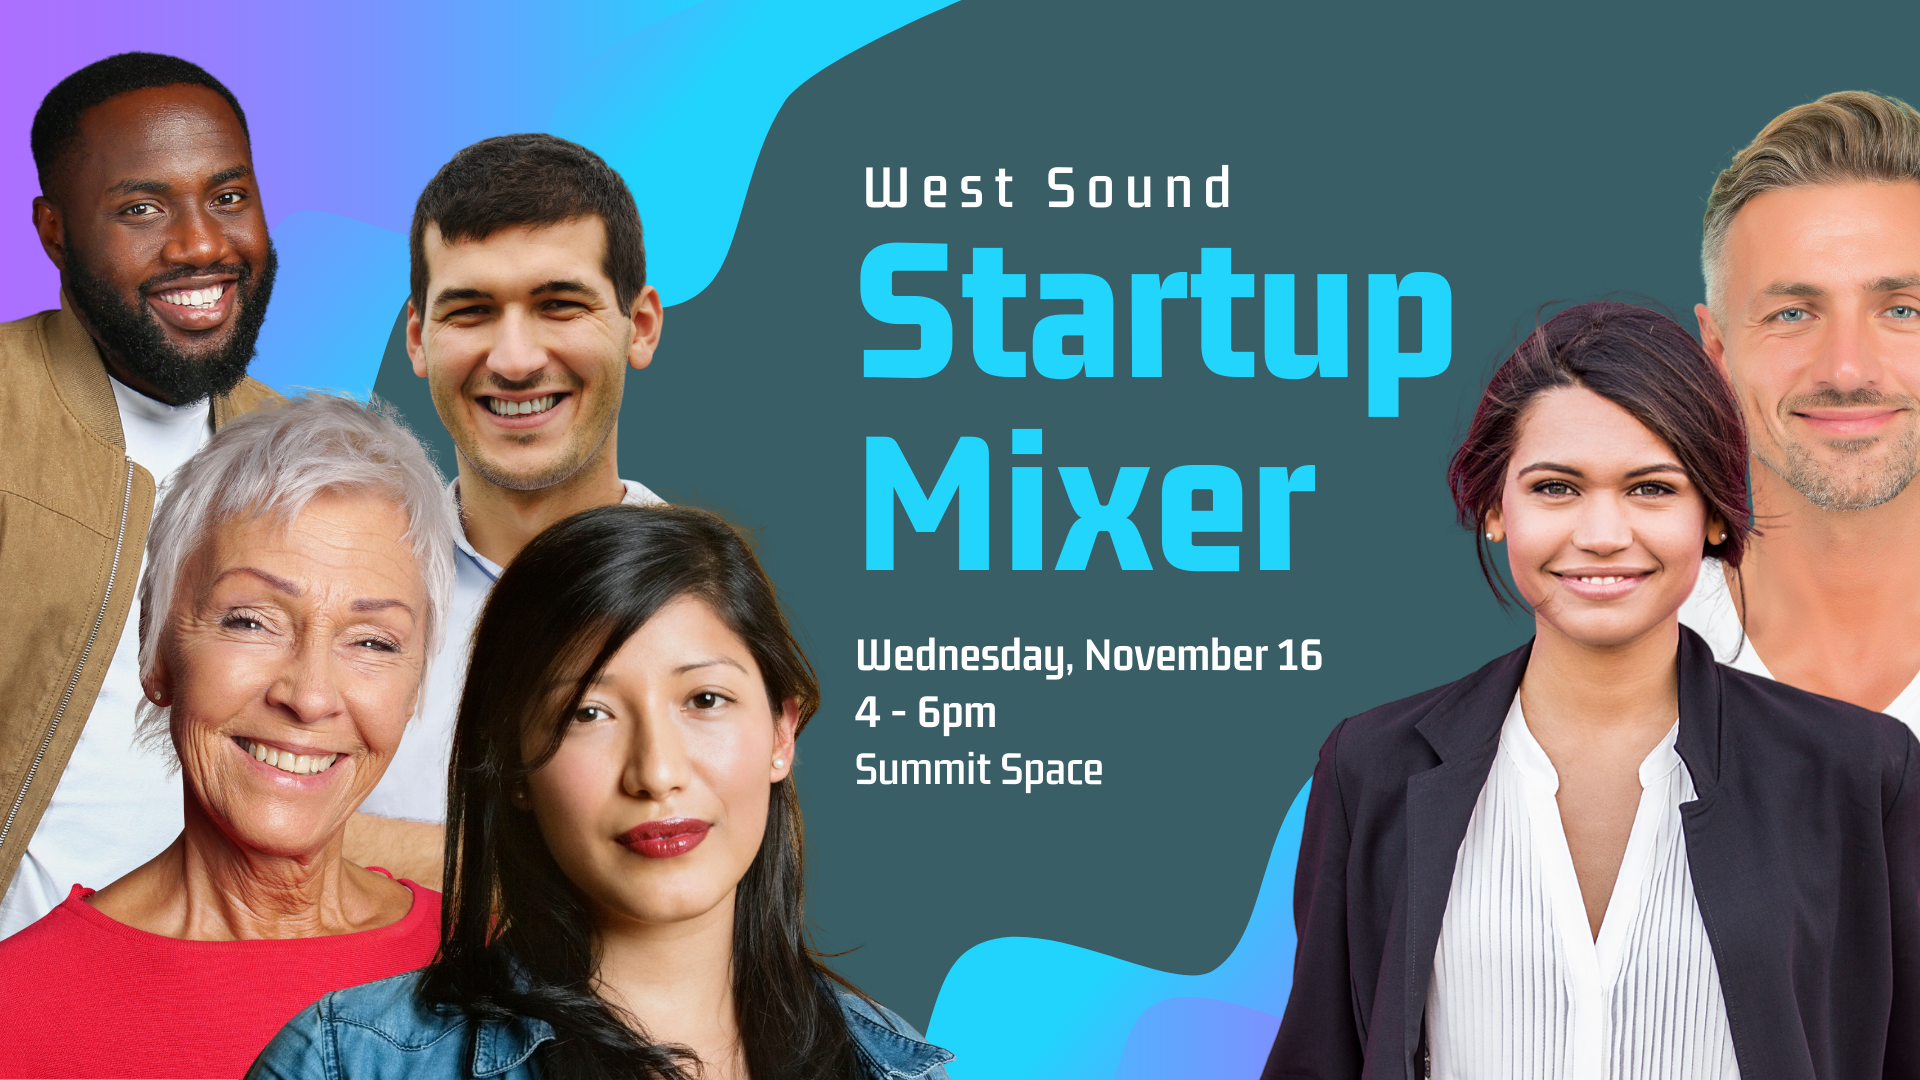 Startup Mixer info - photos of a diverse group of people